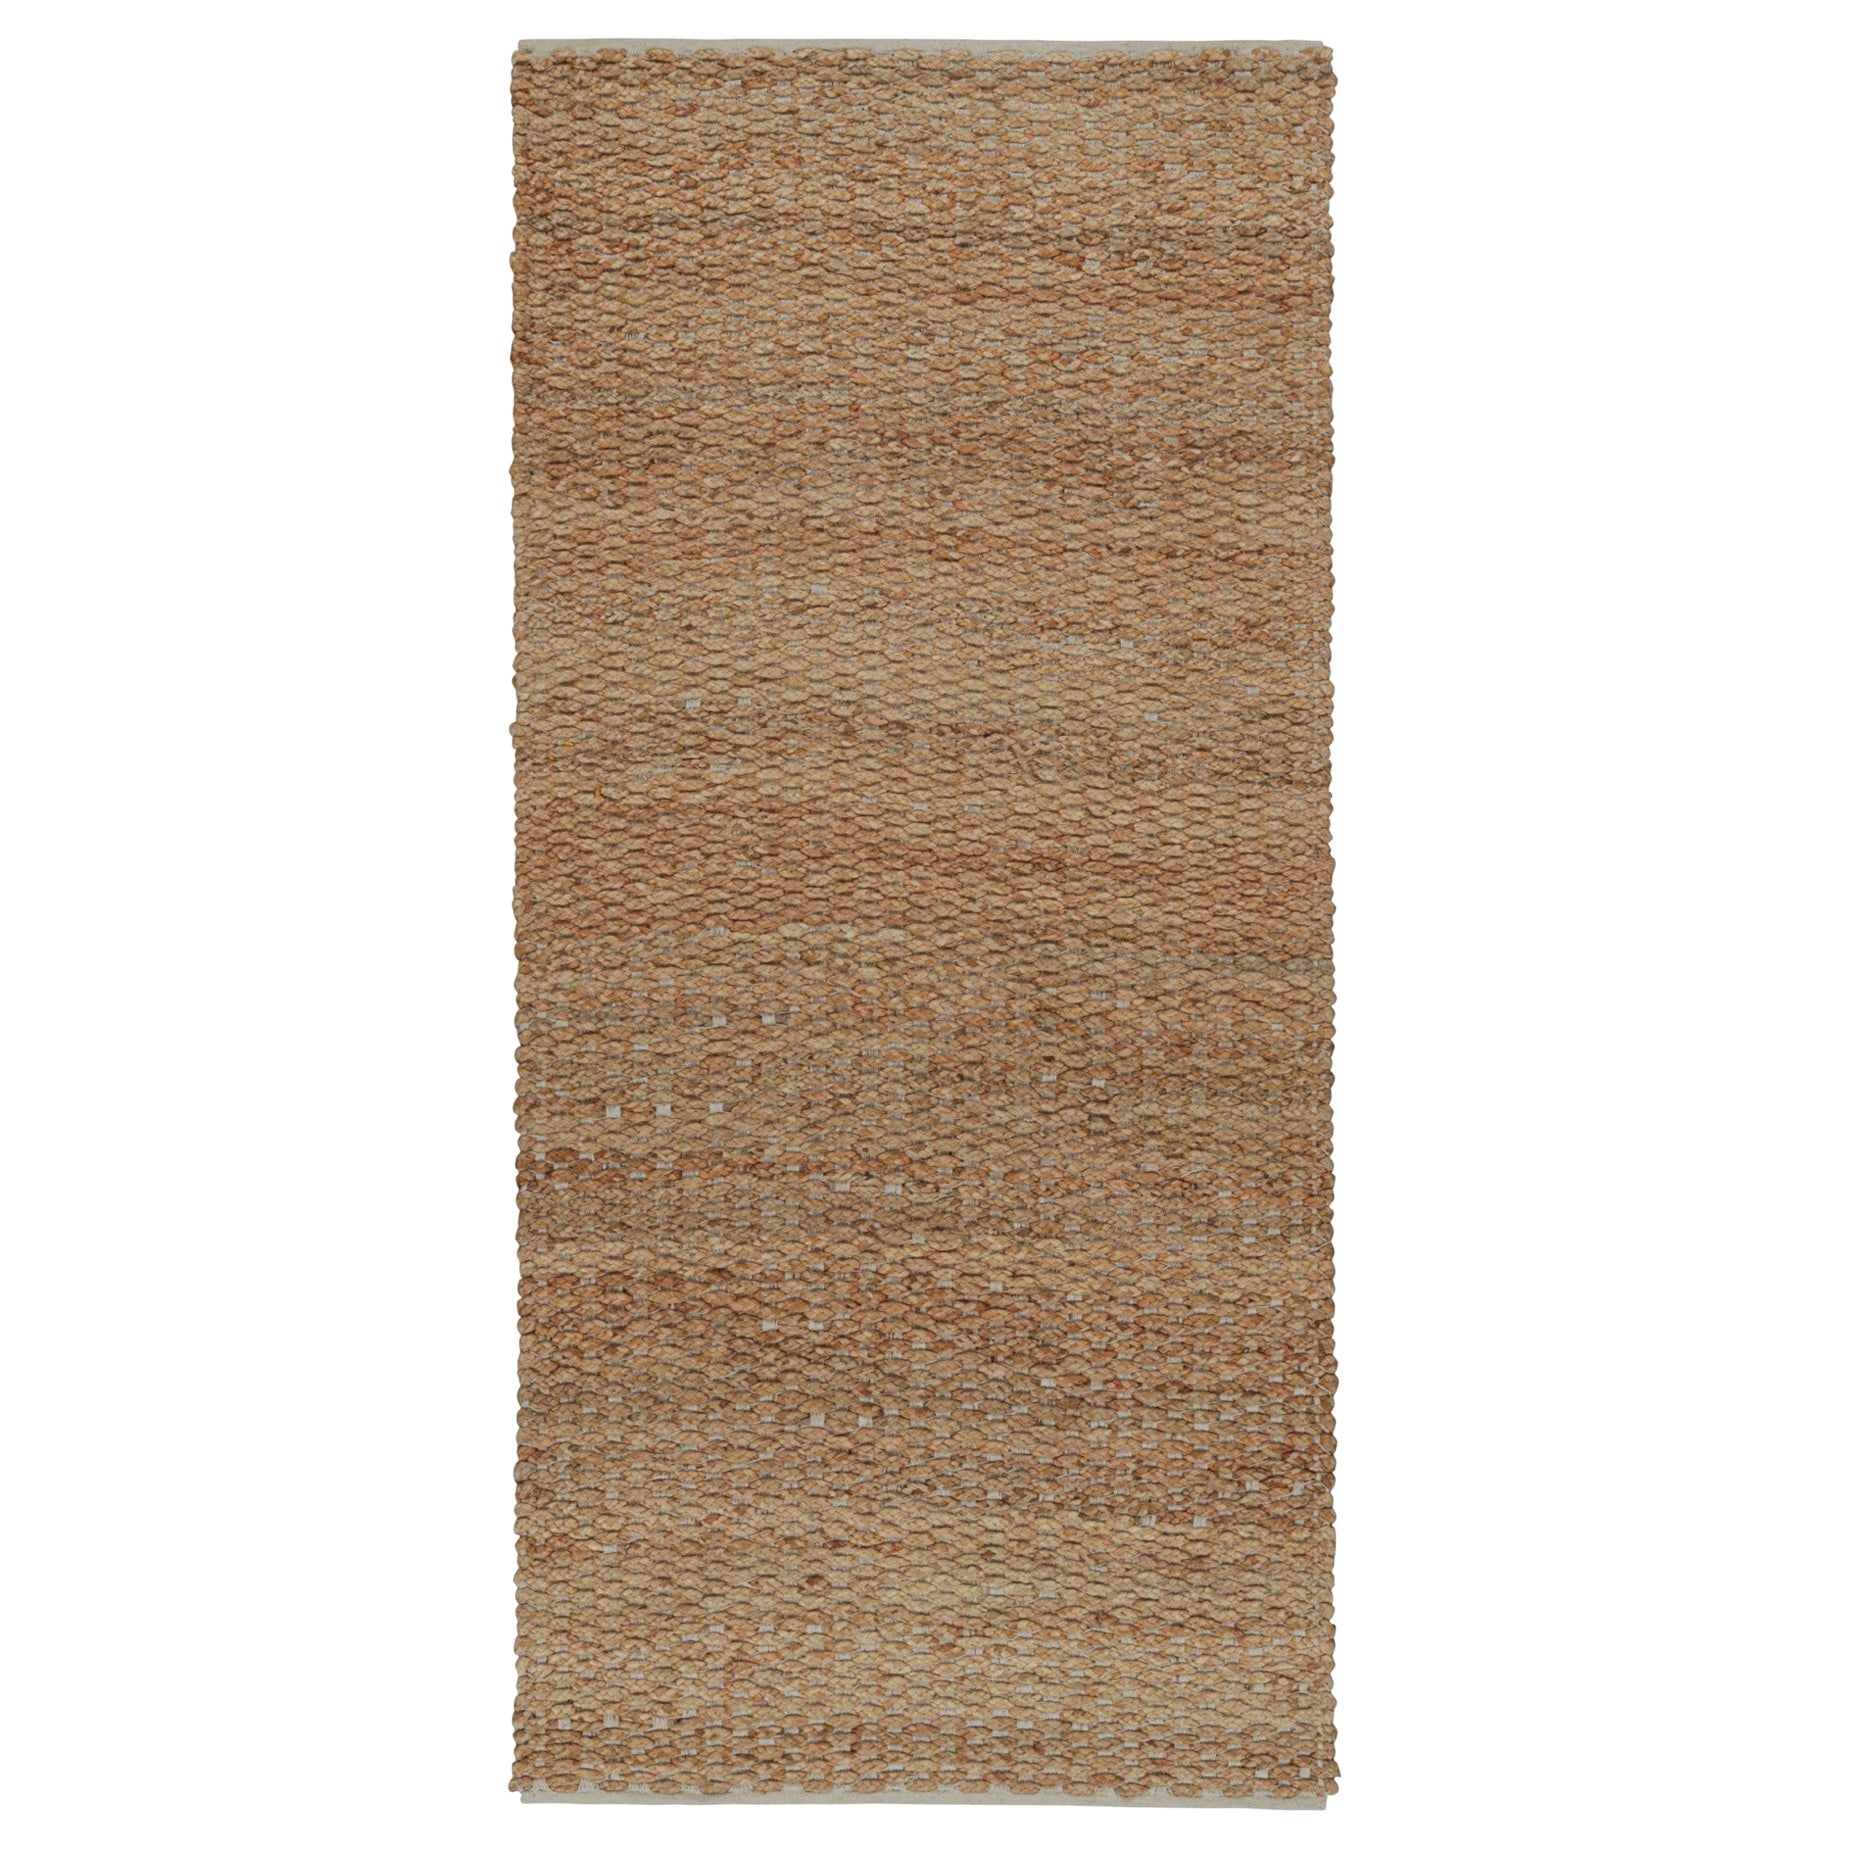 The Moderns Flatweave Runner in Beige/Brown, with Textural Stripes, from Rug & Kilim (en anglais seulement) en vente